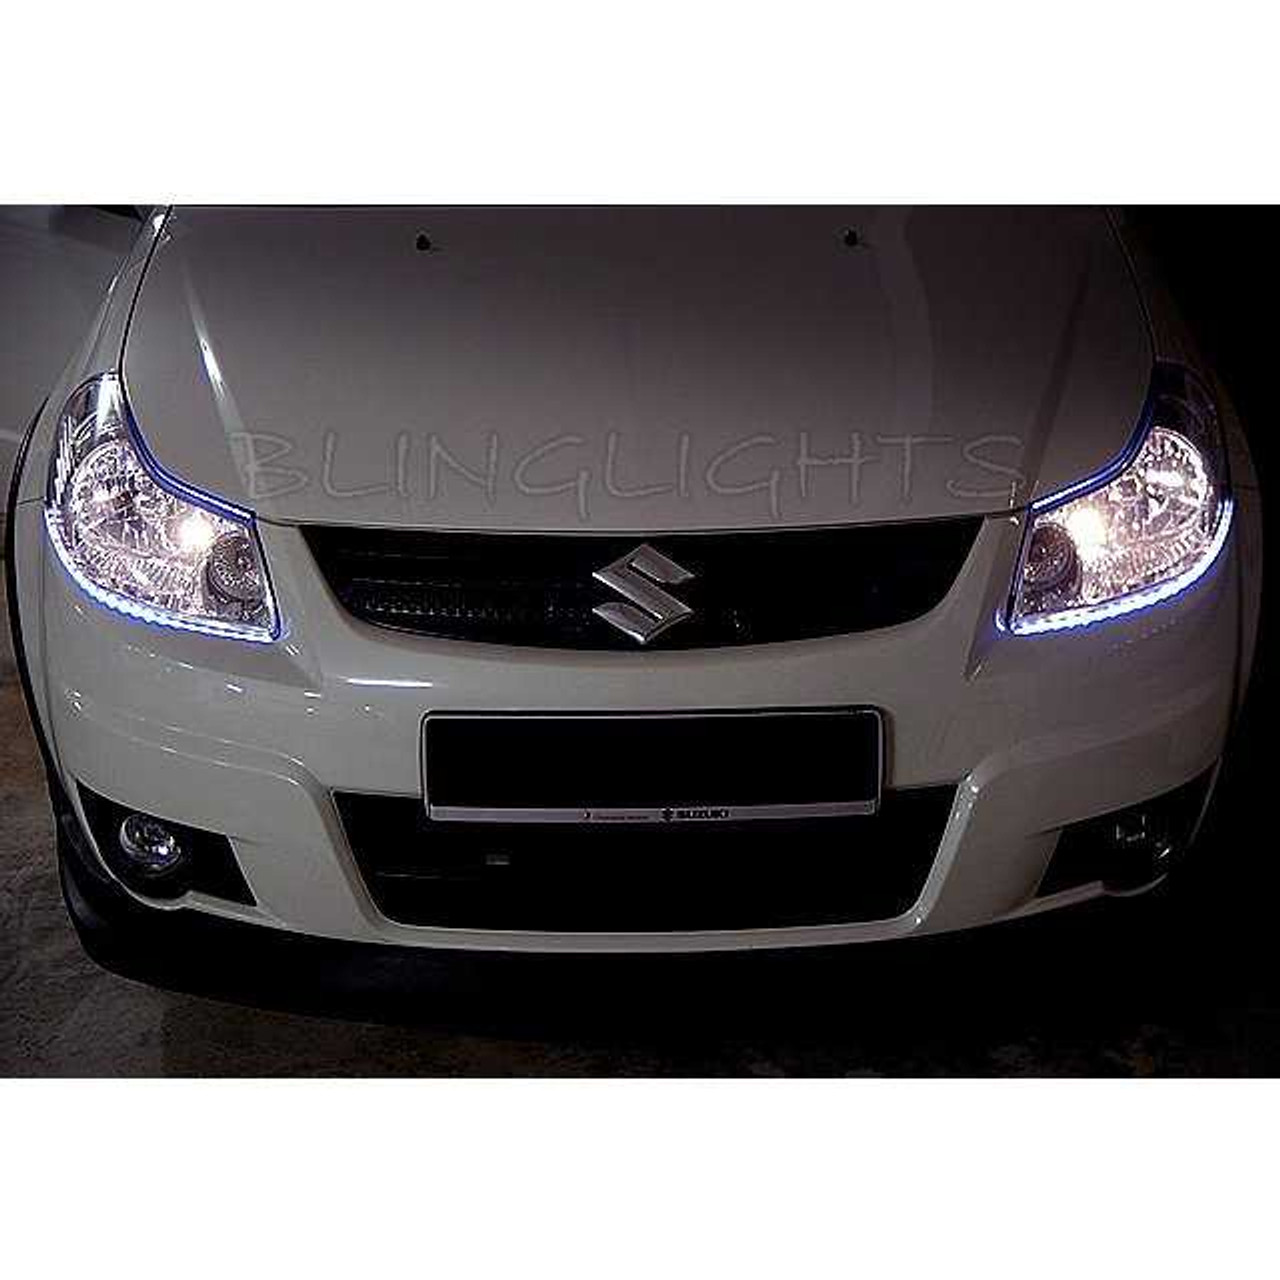 Suzuki SX4 LED DRL Light Strips for Headlamps Headlights Head Lamps Day Time Running Strip Lights